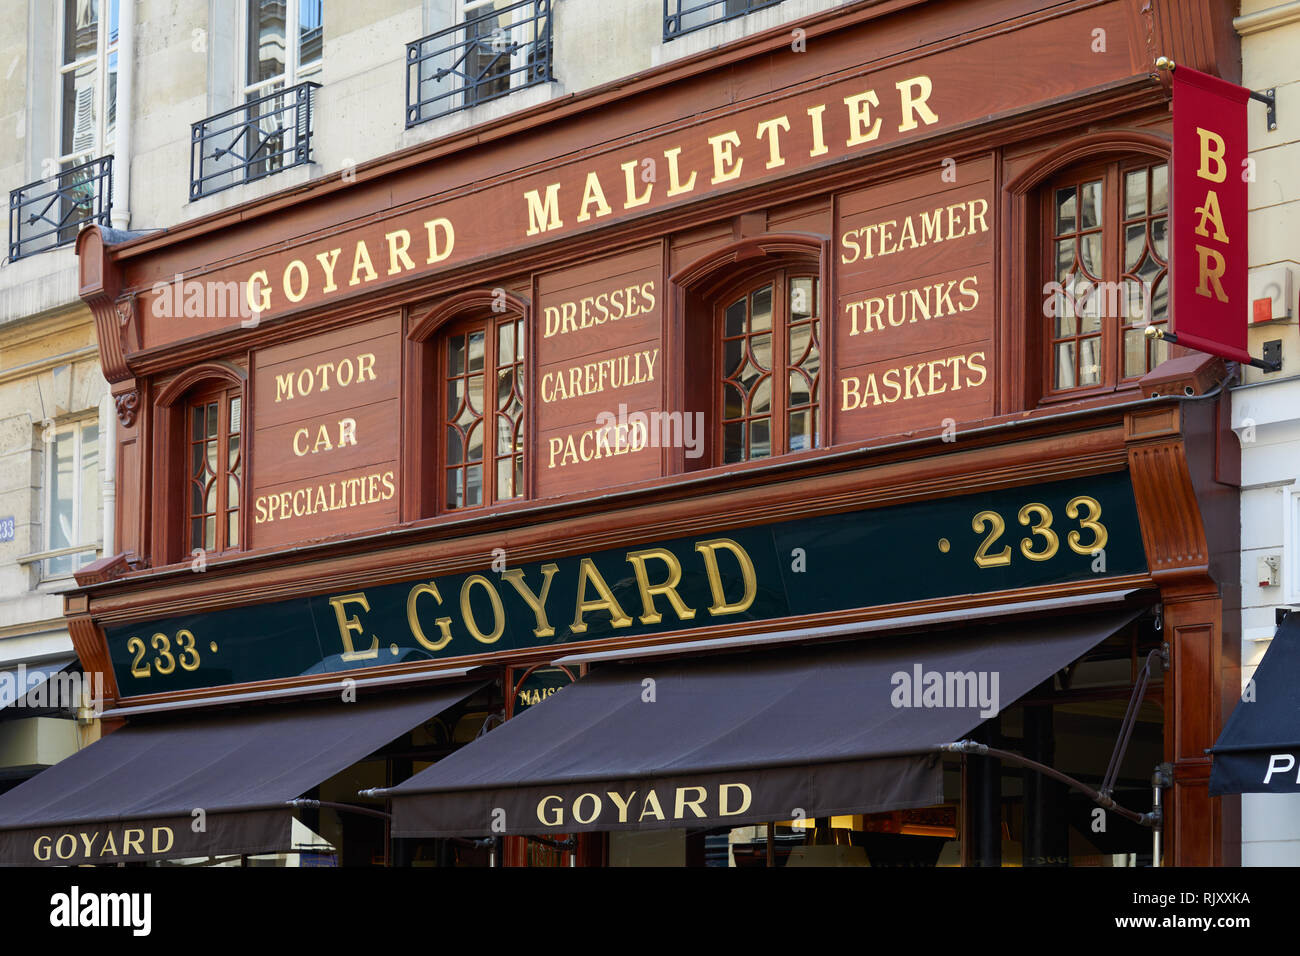 PARIS, FRANCE - JULY 07, 2018: Goyard luxury shop in Paris with wooden facade and golden letters sign in summer Stock Photo